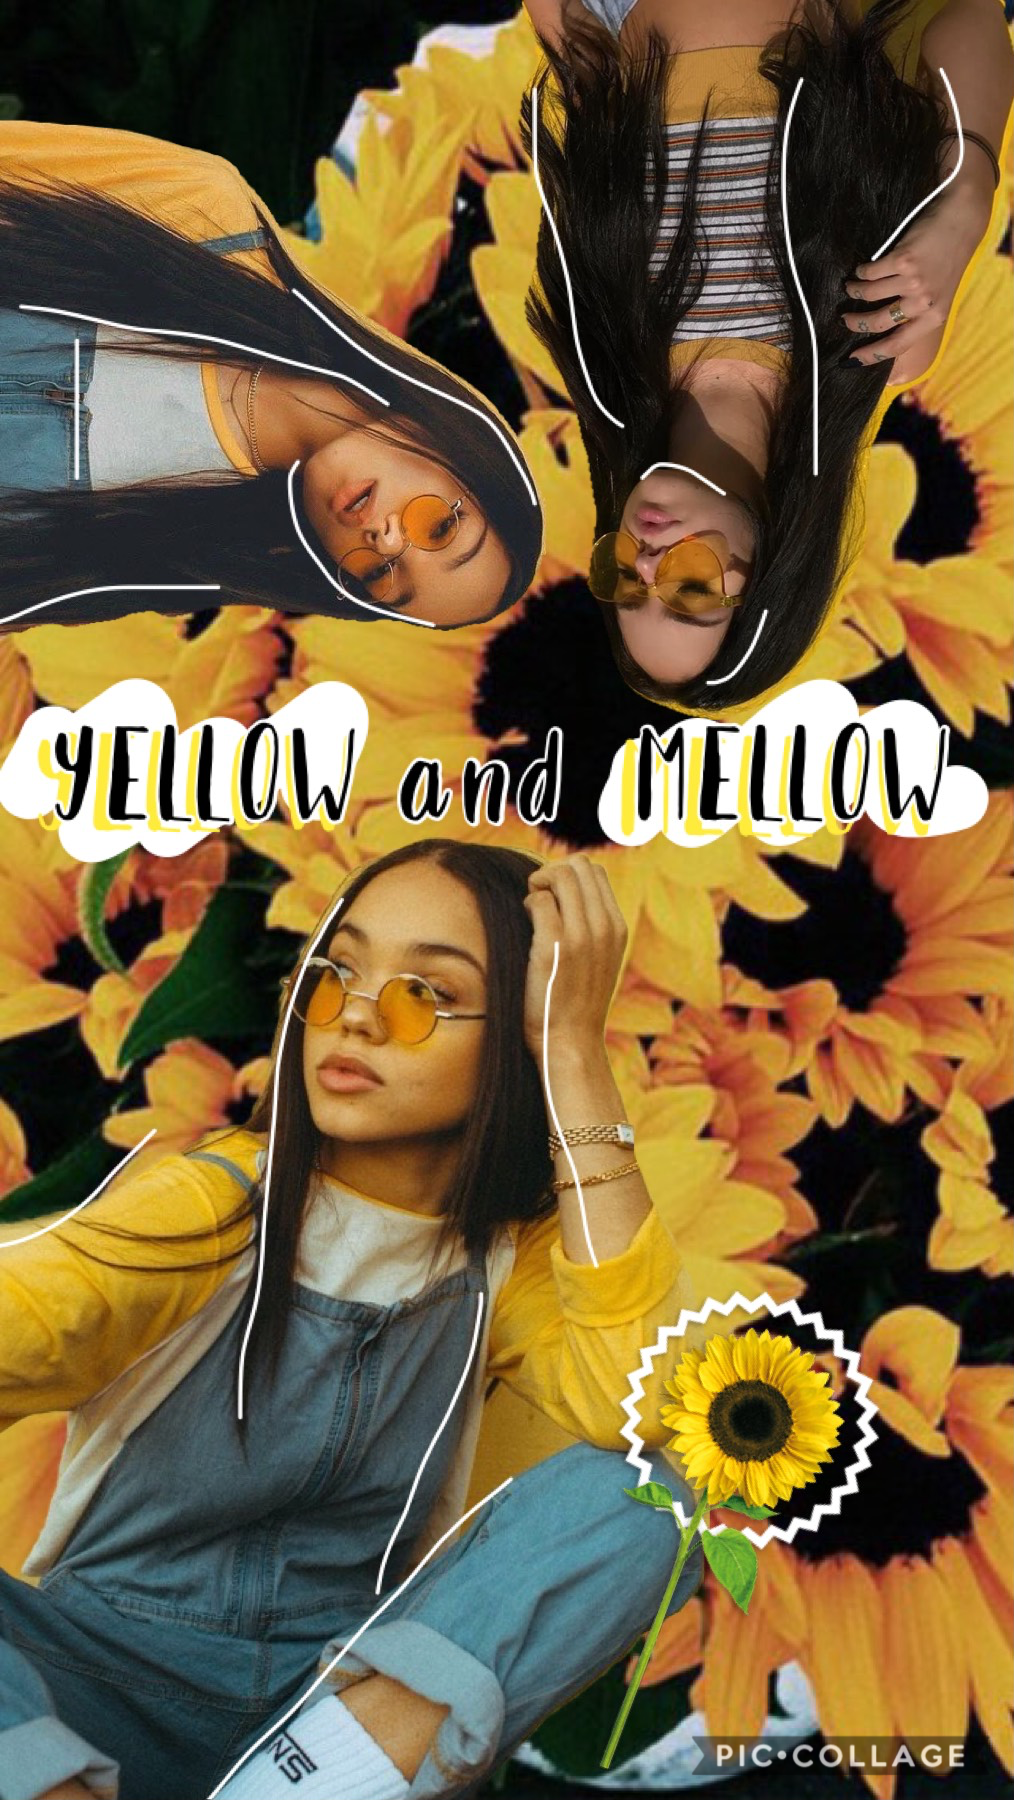 i am so sorry (tap🌻)
sooo i haven’t been on pc for like... two weeks? and i’m so sorry! there’s been things going on and INSPO HAS BEEN SO ANNOYING (ty for jayraffe inspo ha 🐝) buut here’s a bad yellow collage yay 🌼
RAINBOW #3 - YELLOW 💛